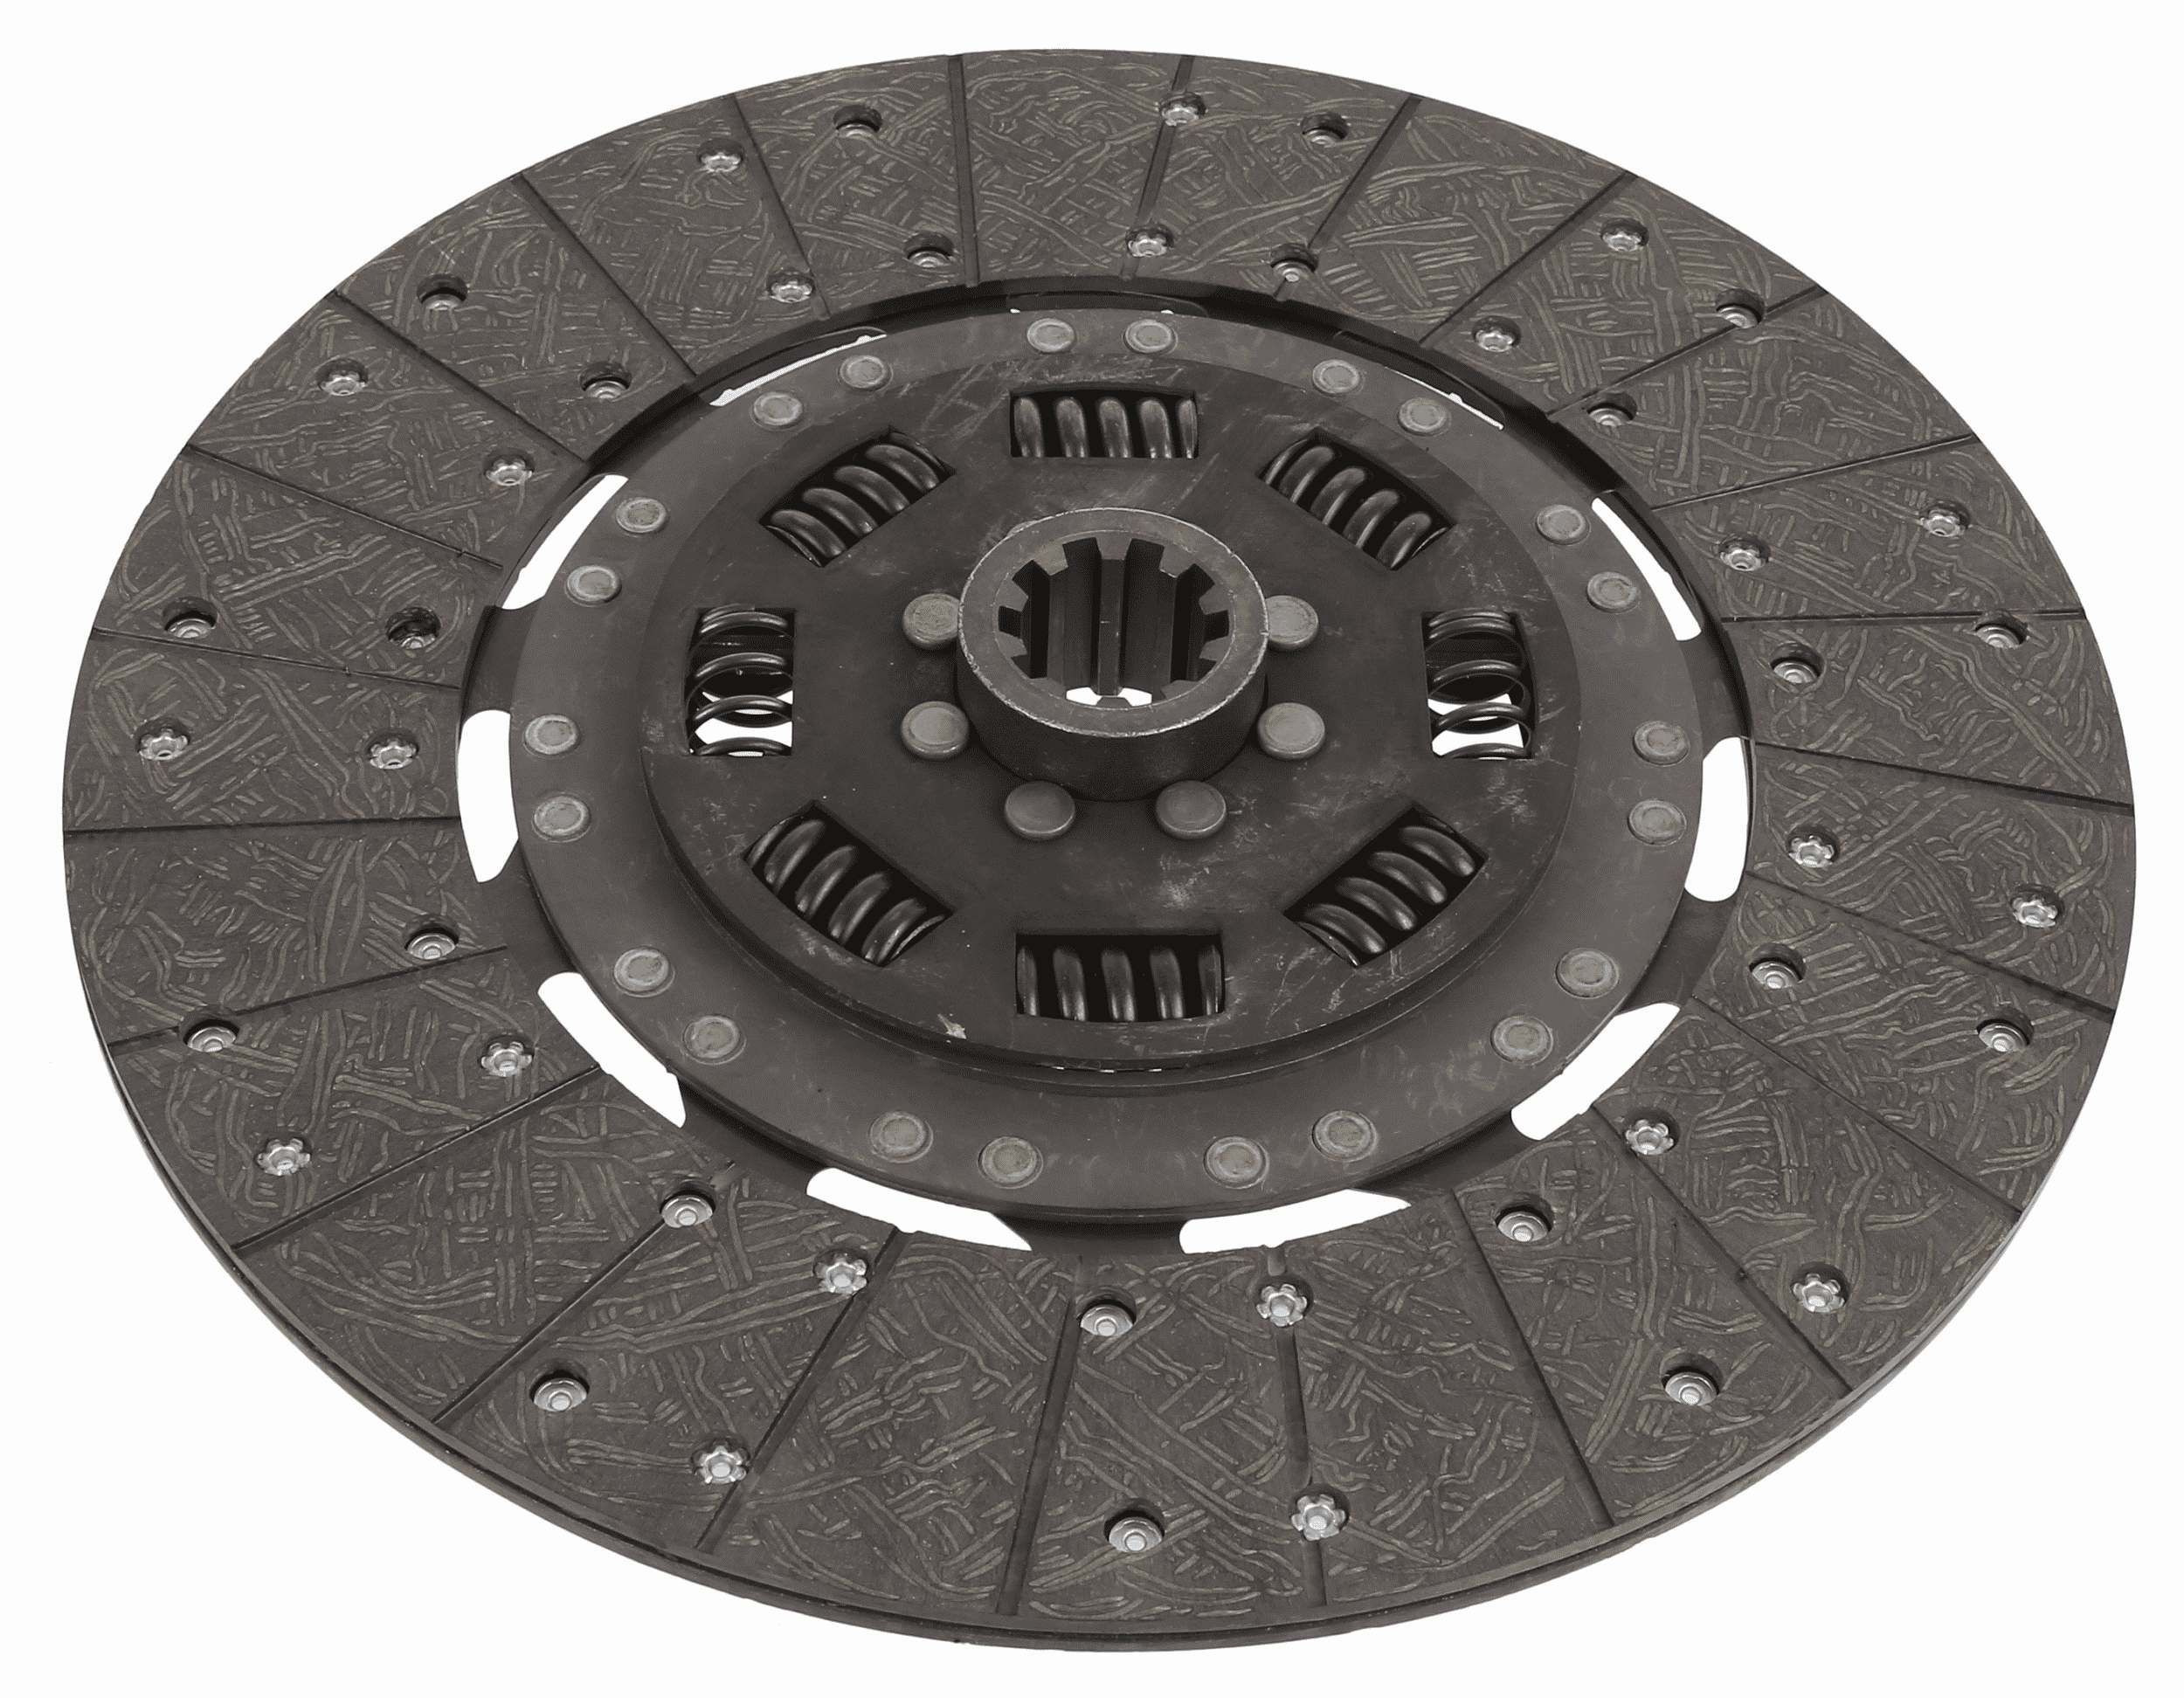 SACHS 1878 634 244 Clutch Disc 350mm, Number of Teeth: 10